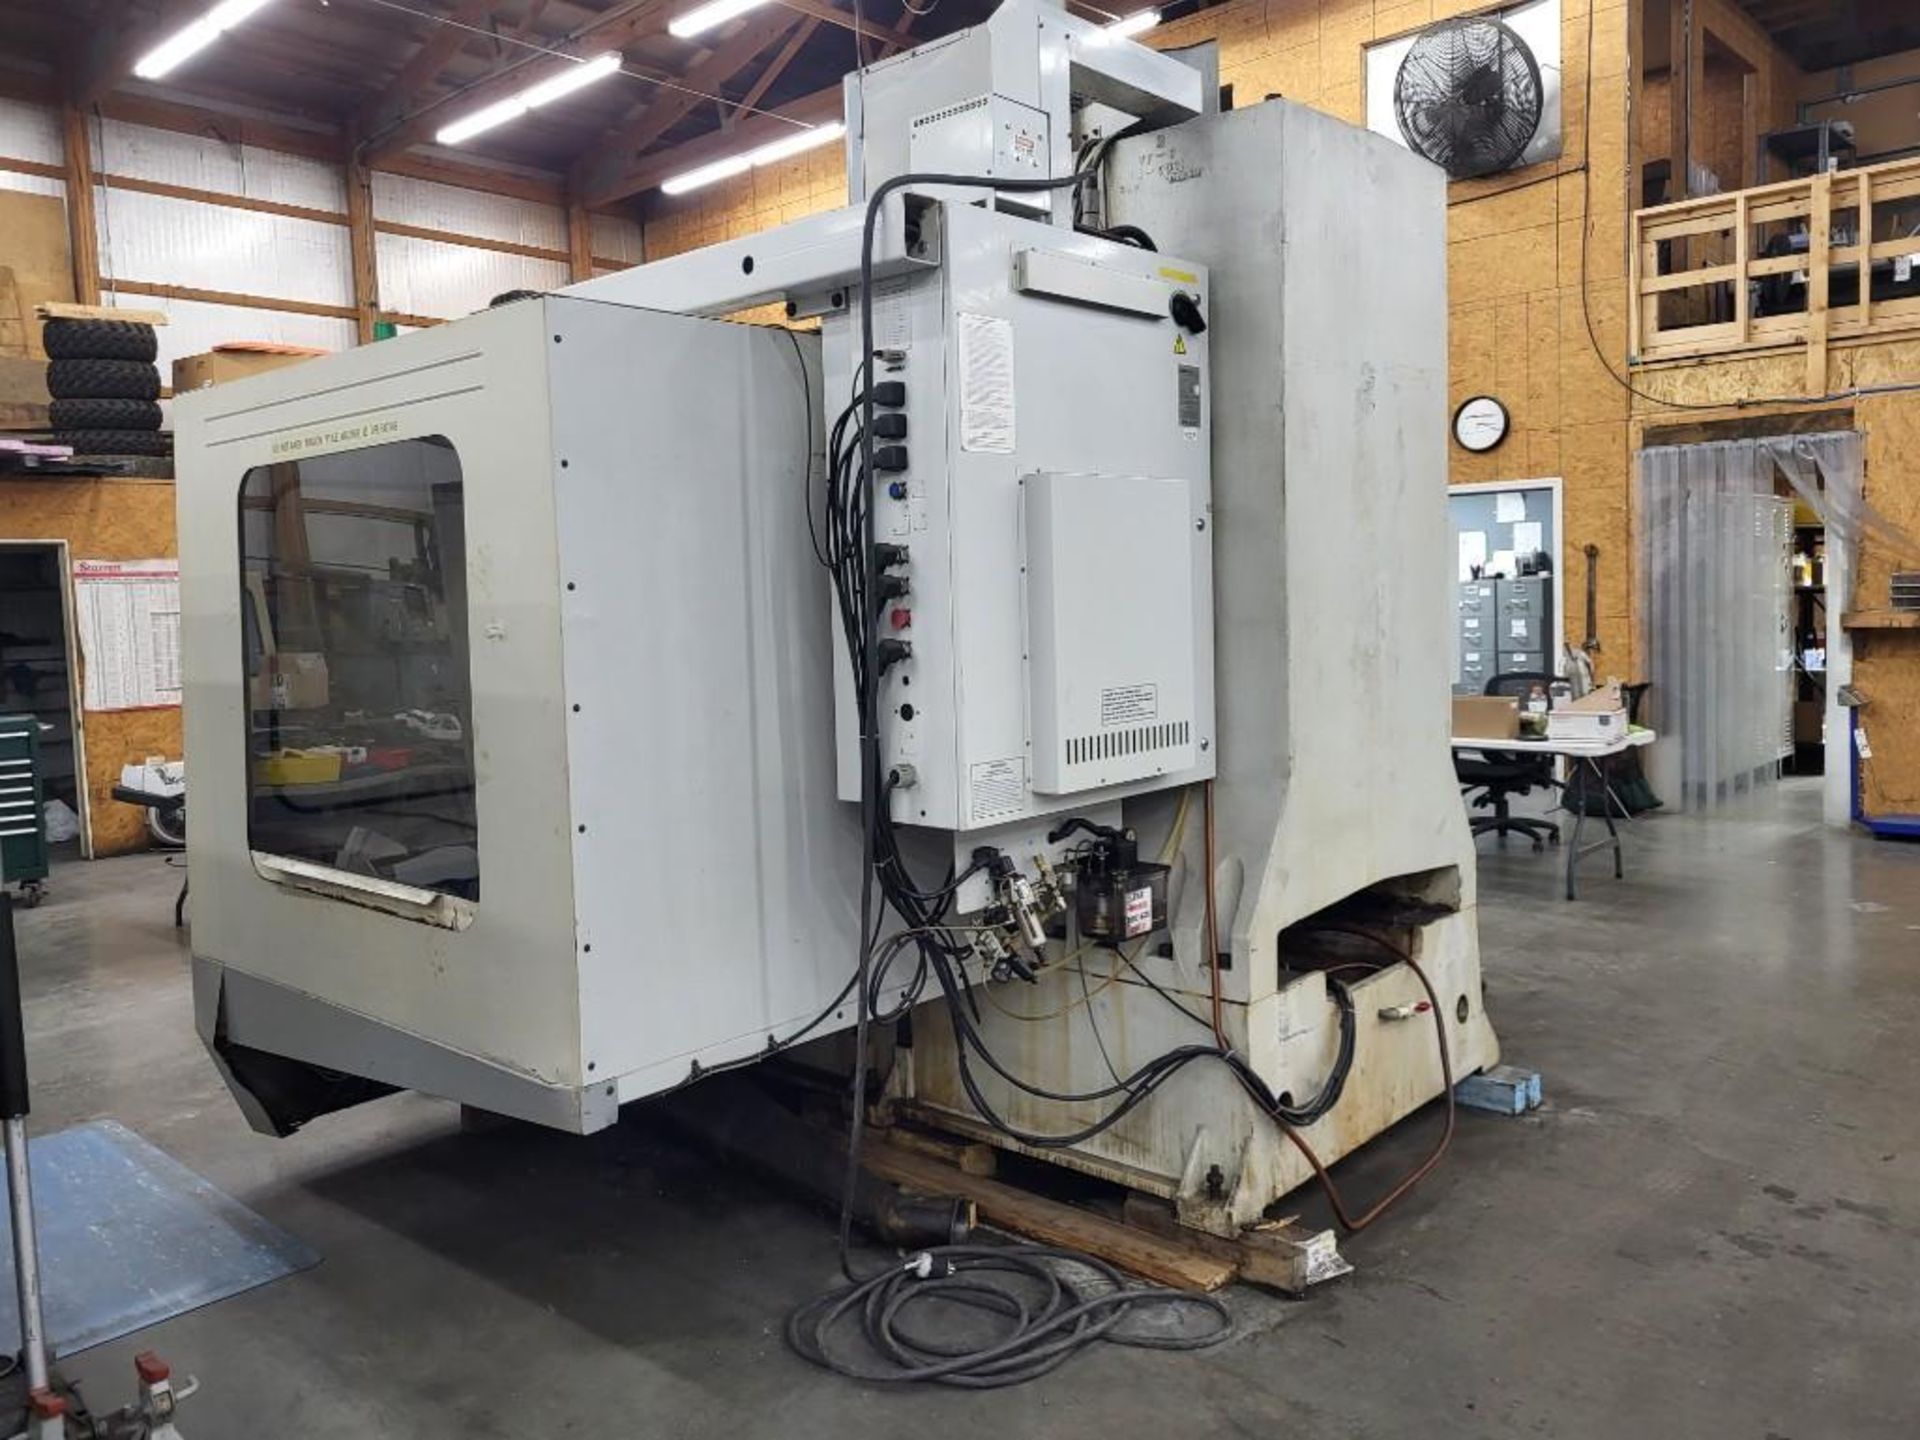 1999 HAAS VF-6 CNC VERTICAL MACHINING CENTER - Image 5 of 17